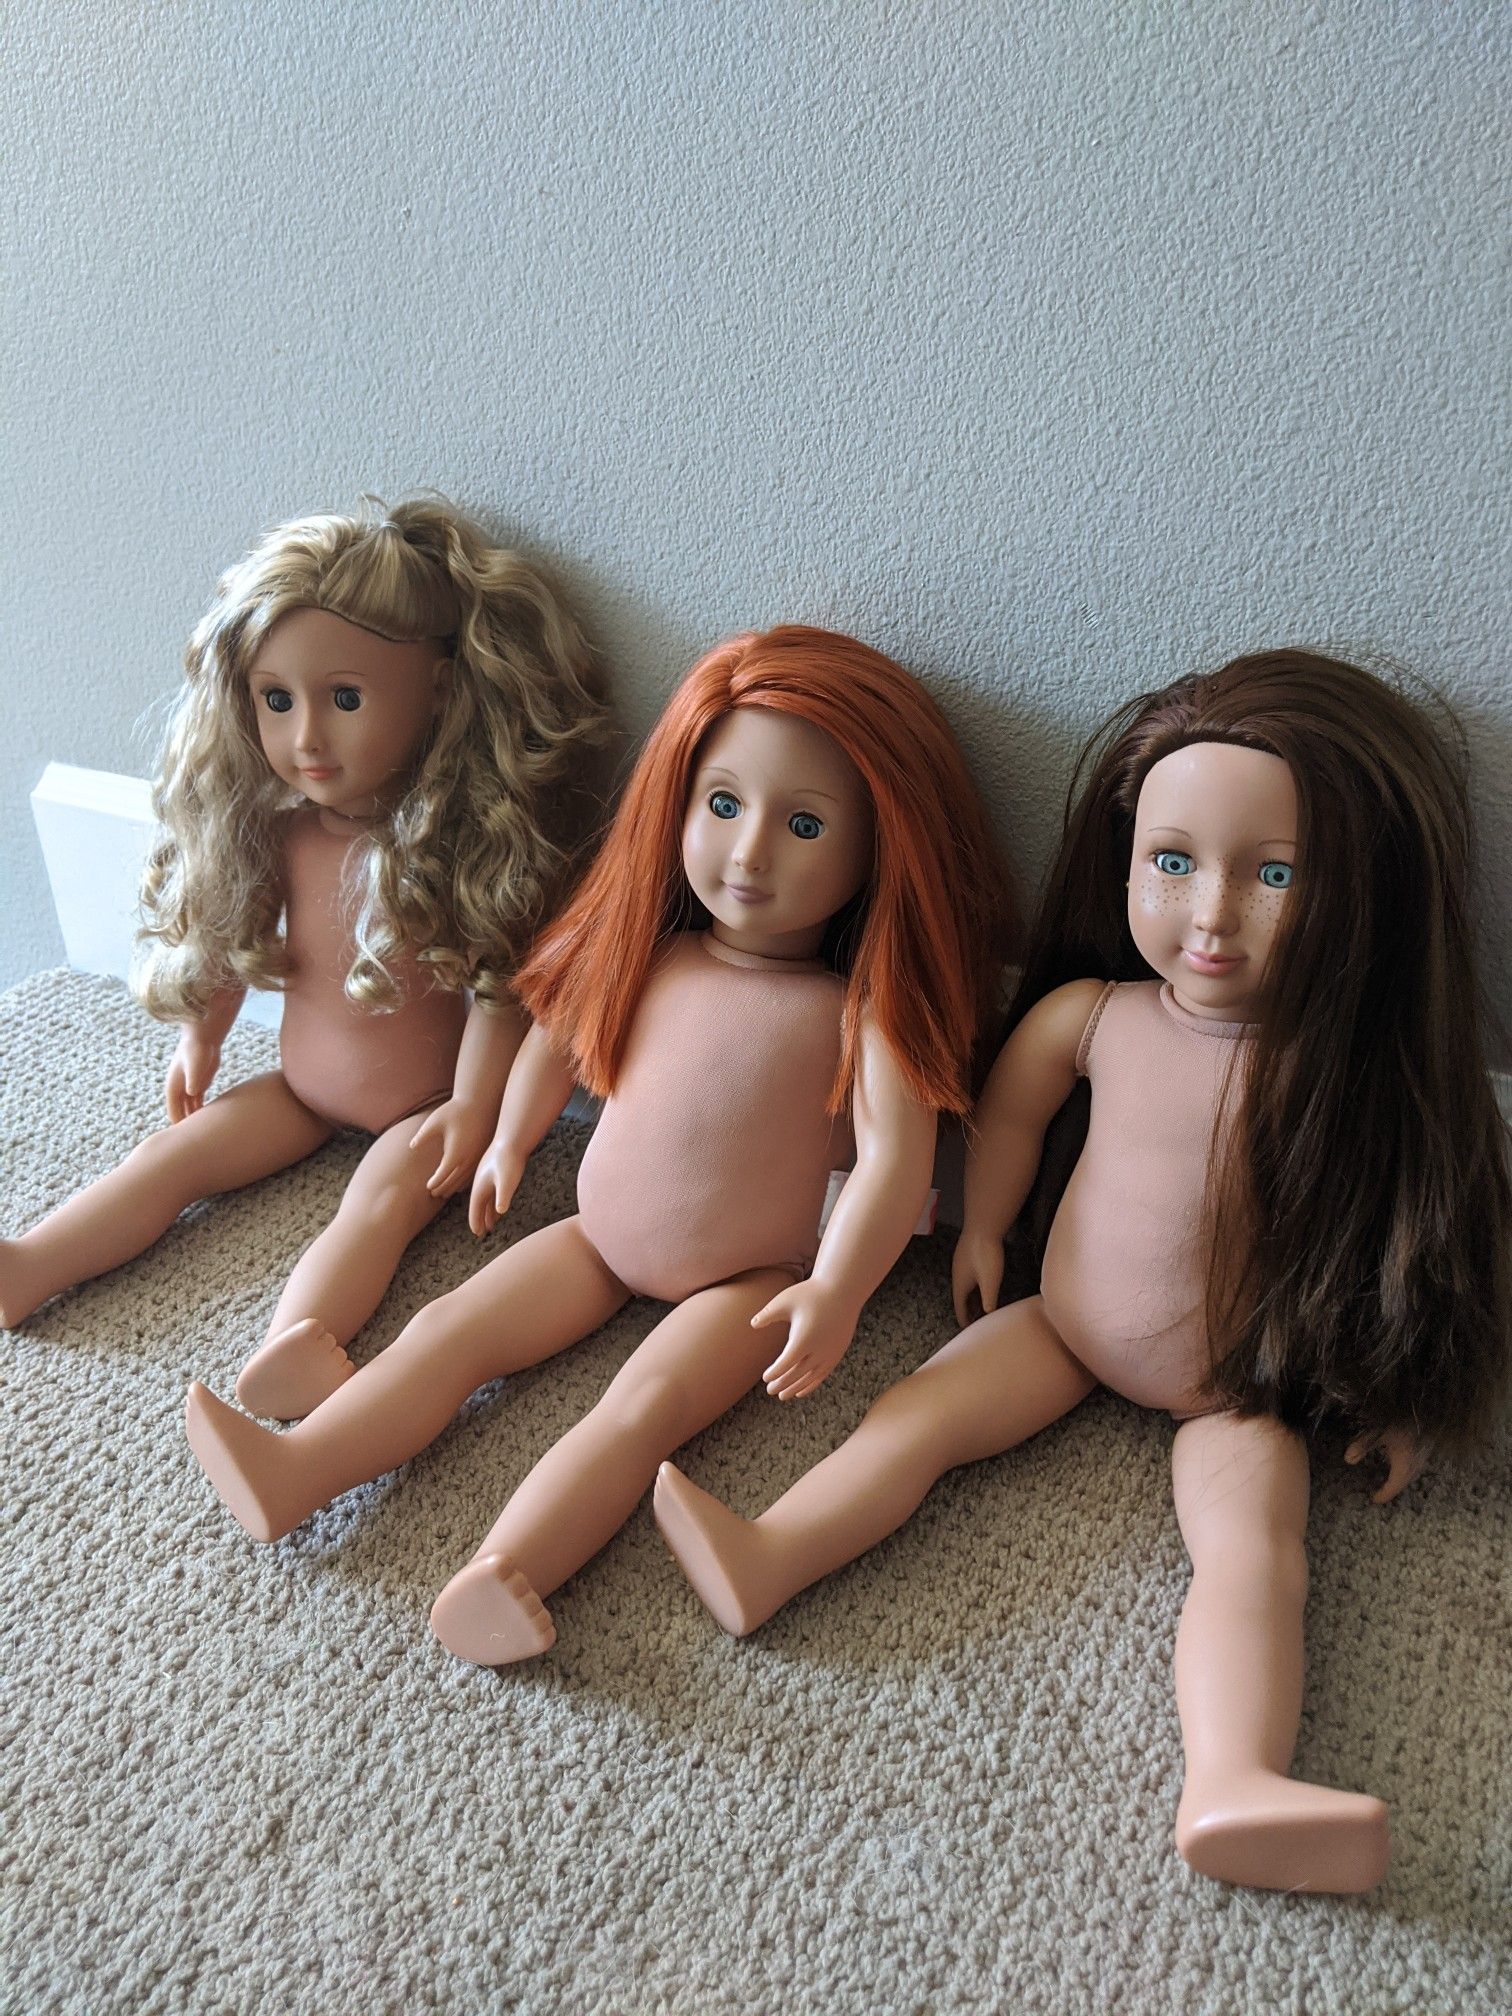 Our Generation Dolls